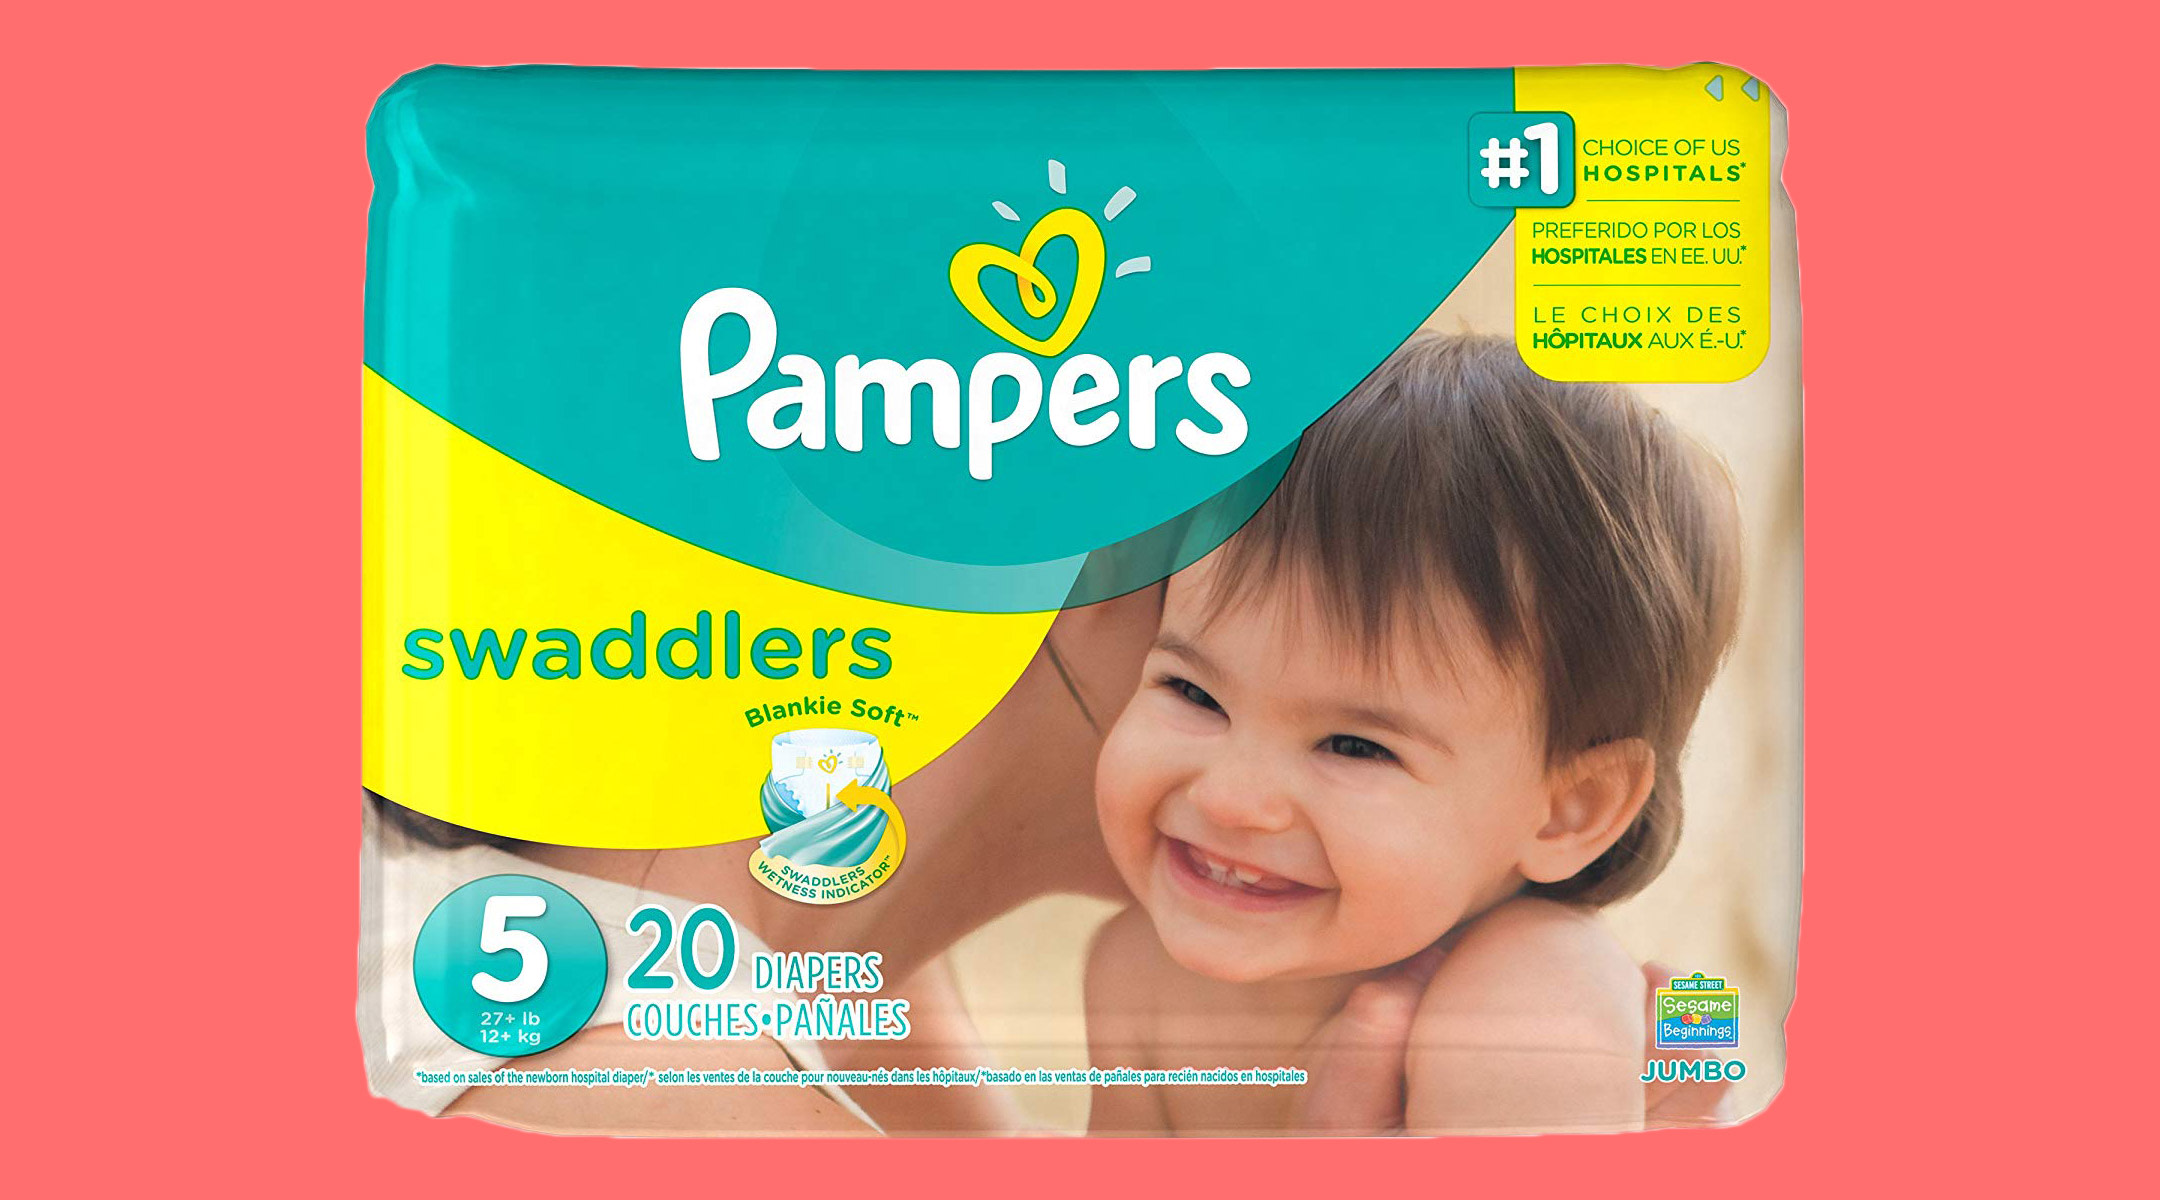 pampers diaper product, due to increase in price